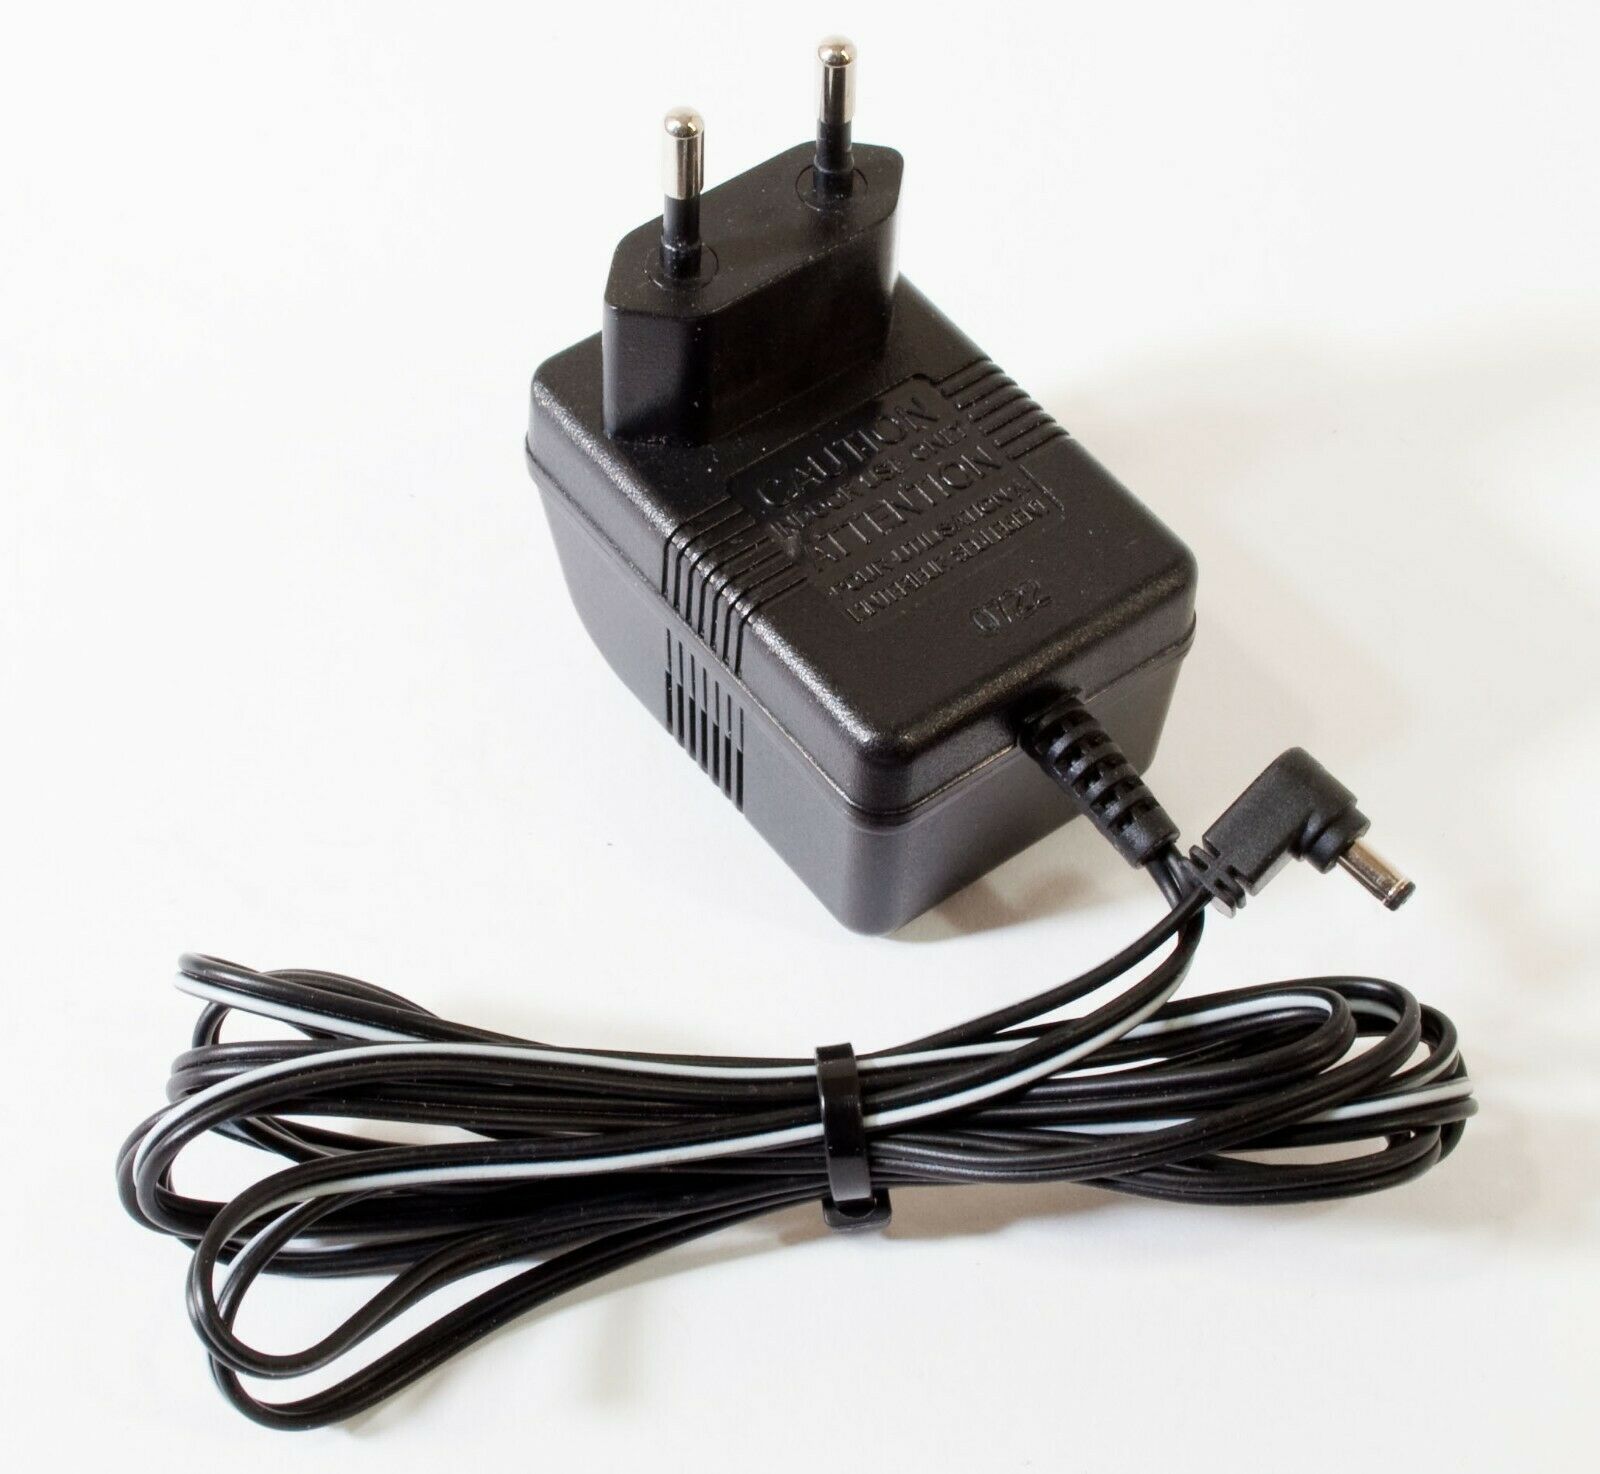 GPE SY-06030-GS AC Adapter 6V 300mA Original Charger Power Supply Output Current: 300 mA Voltage: 6 V MPN: SY-06030-